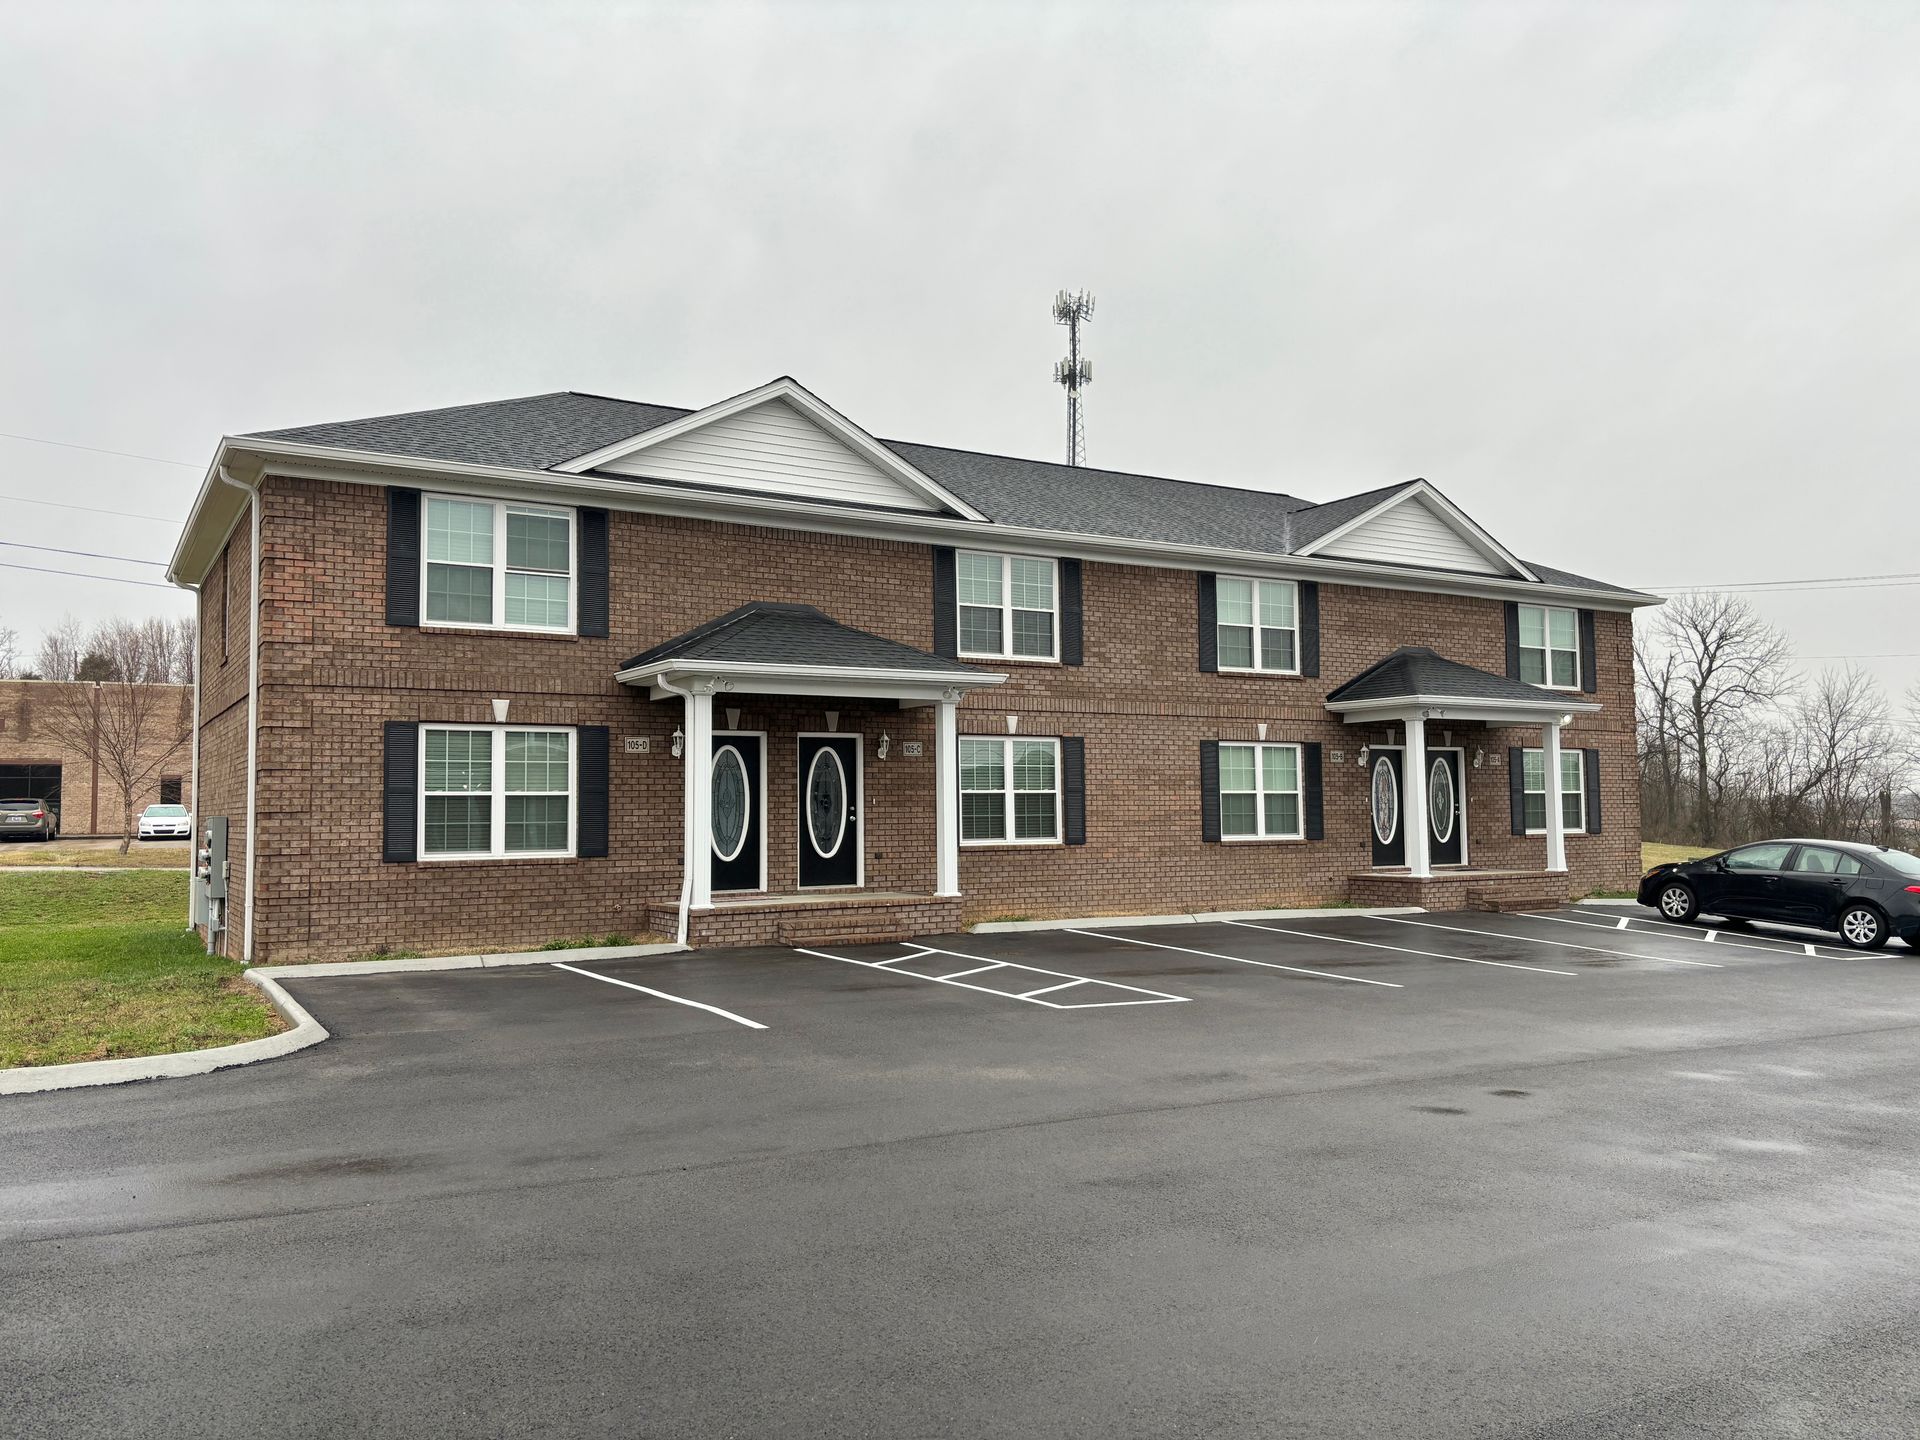 Photo of 103 and 105 Physicians Blvd
Glasgow, KY 42141